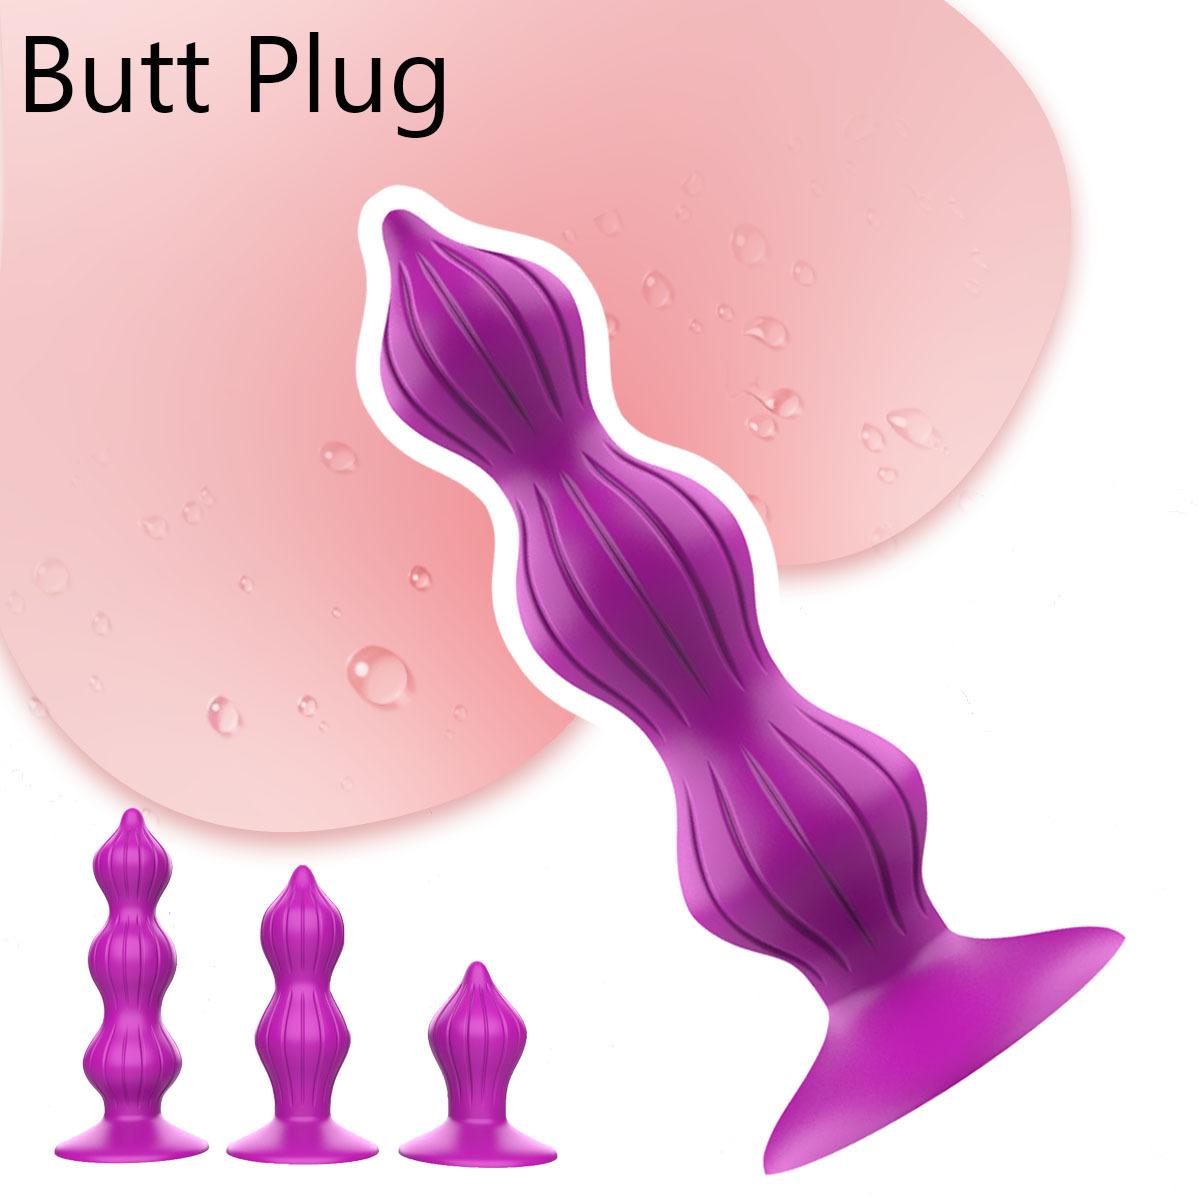 Three bead anal tool with suction cup